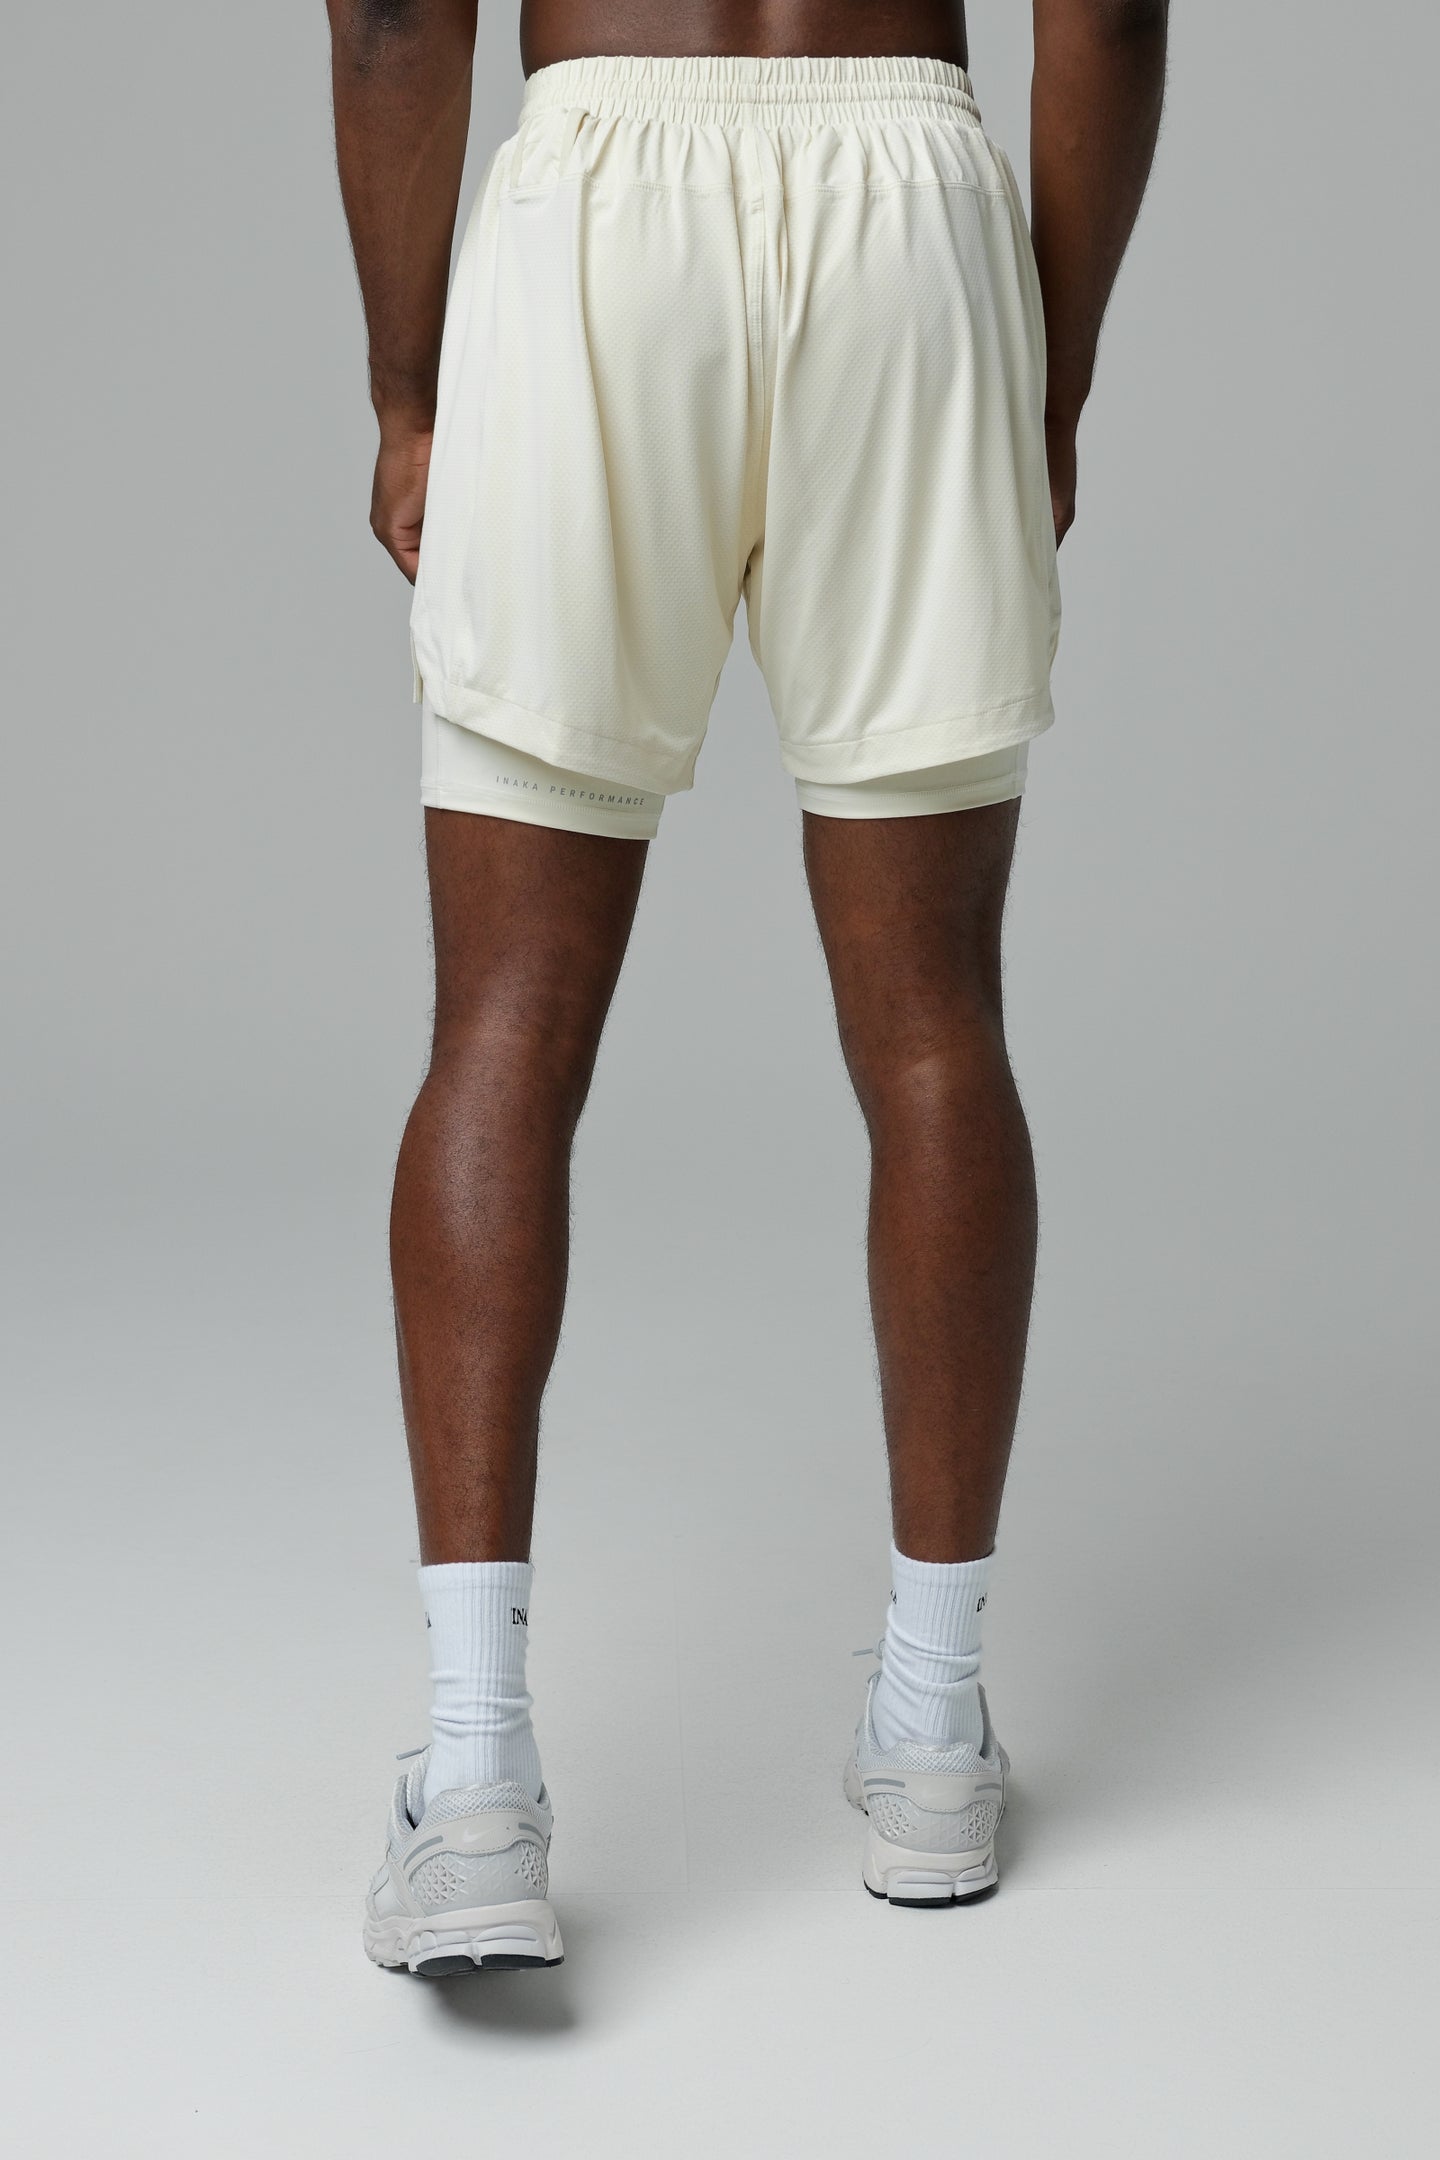 CORELITE SHORTS LINED - OFF WHITE